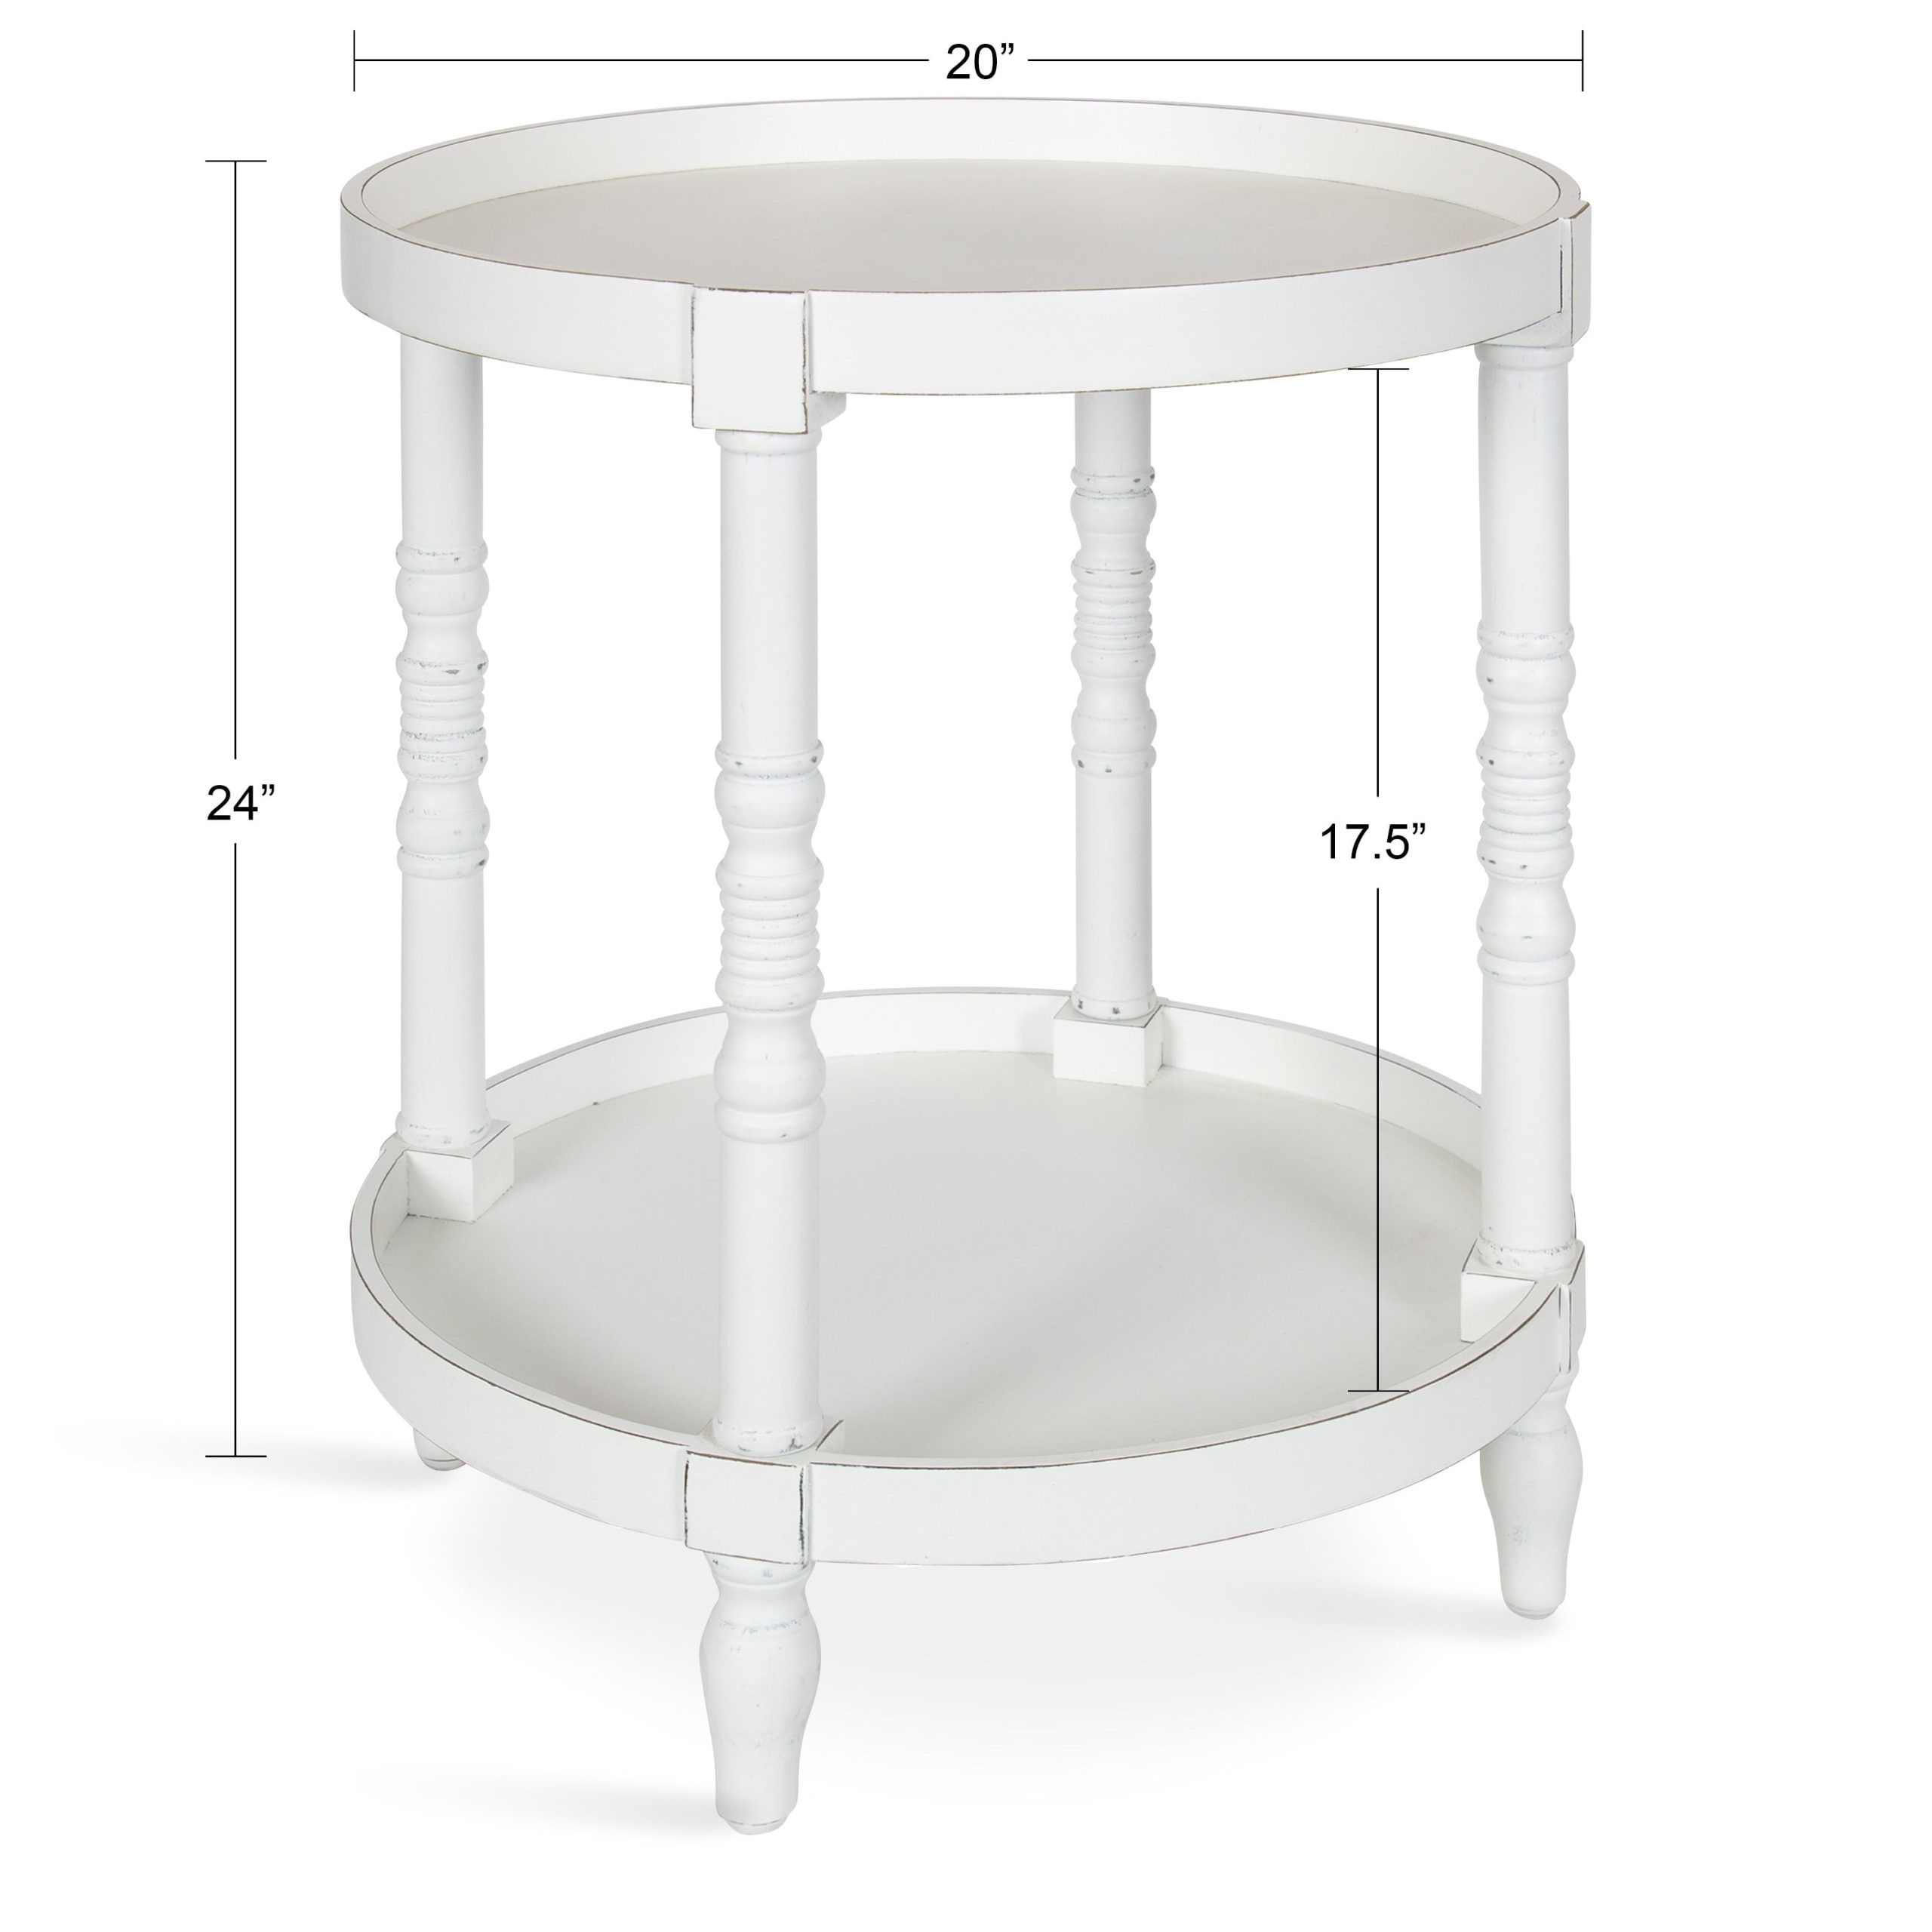 Kate And Laurel Bellport Coastal Round Wood Side Table, 20 X 20 X 24,  White, Chic End Table Accent For Storage And Display – Walmart In Kate And Laurel Bellport Farmhouse Drink Tables (View 8 of 15)